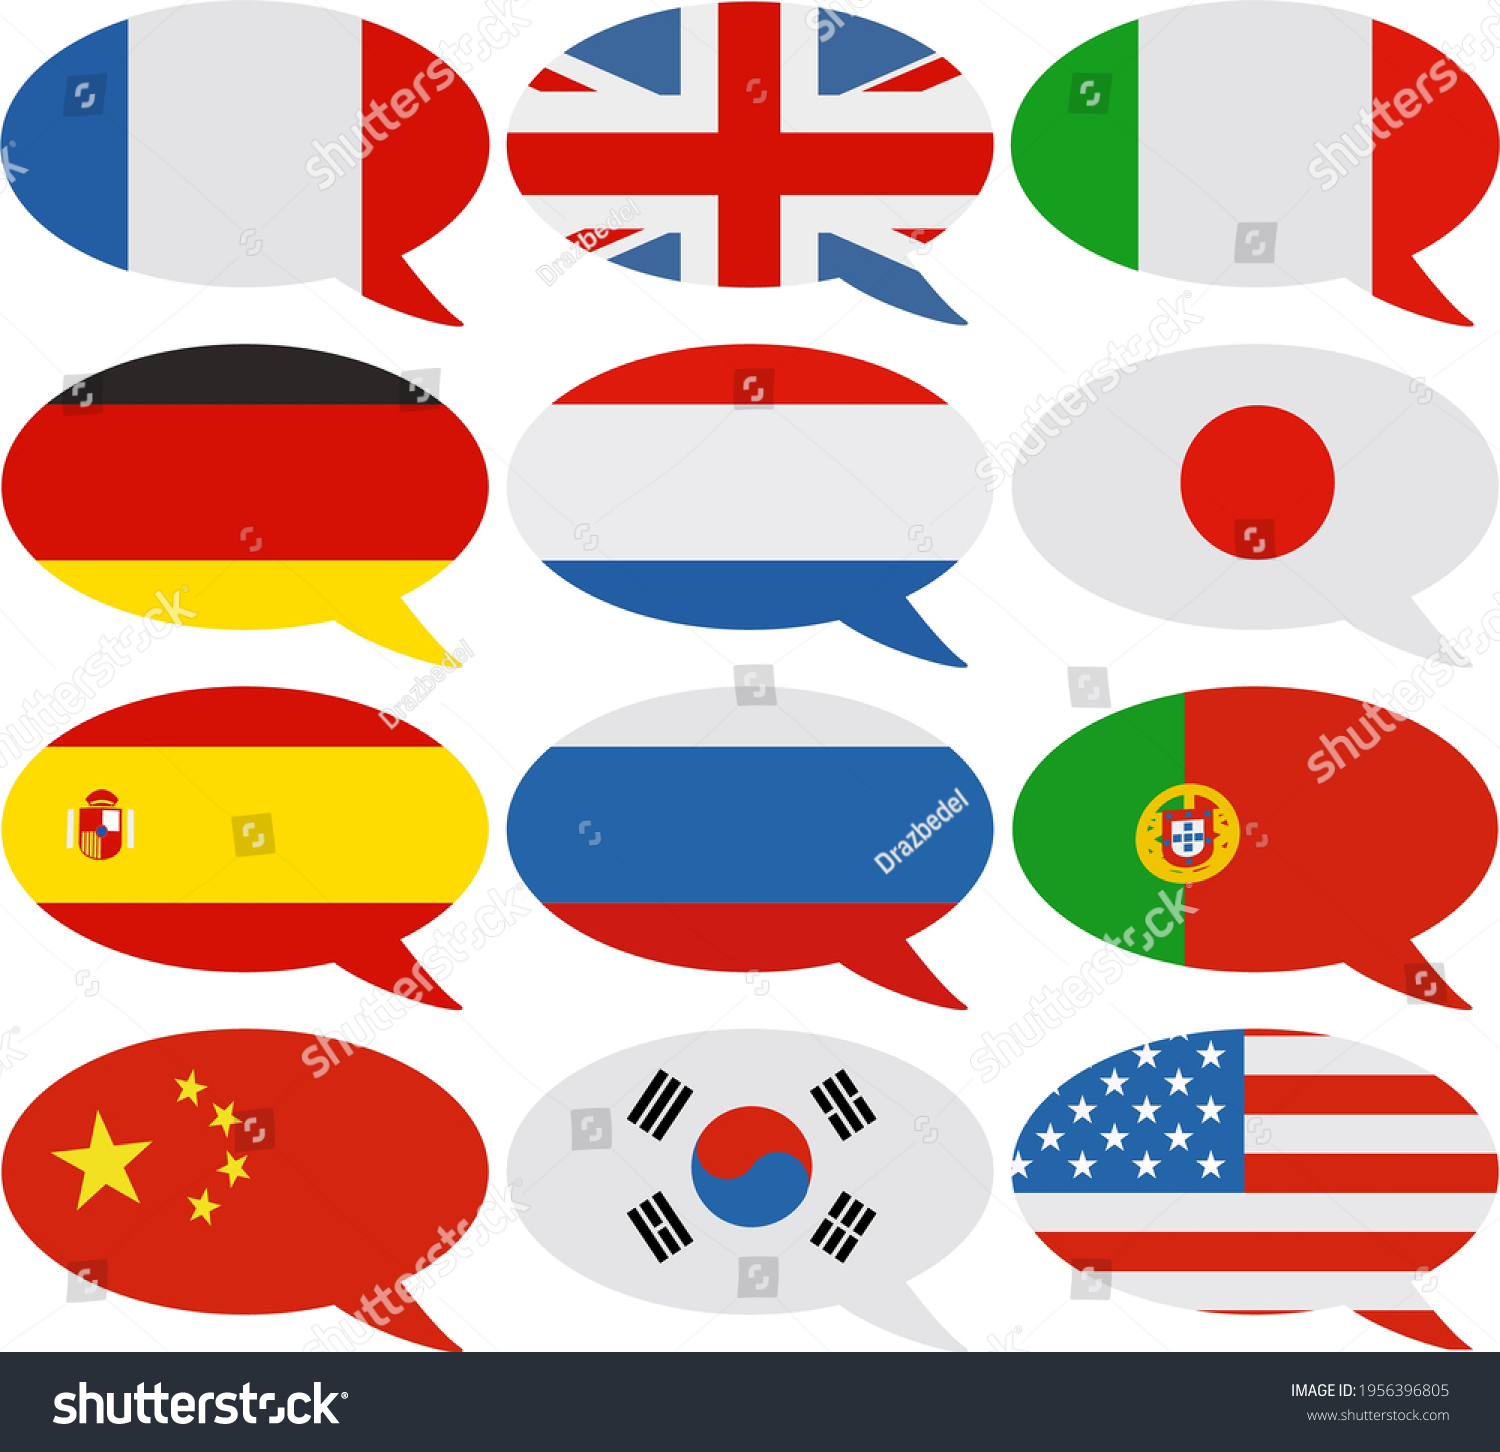 SVG of Collection of speech bubbles defining a language with the country flag (flat design) svg